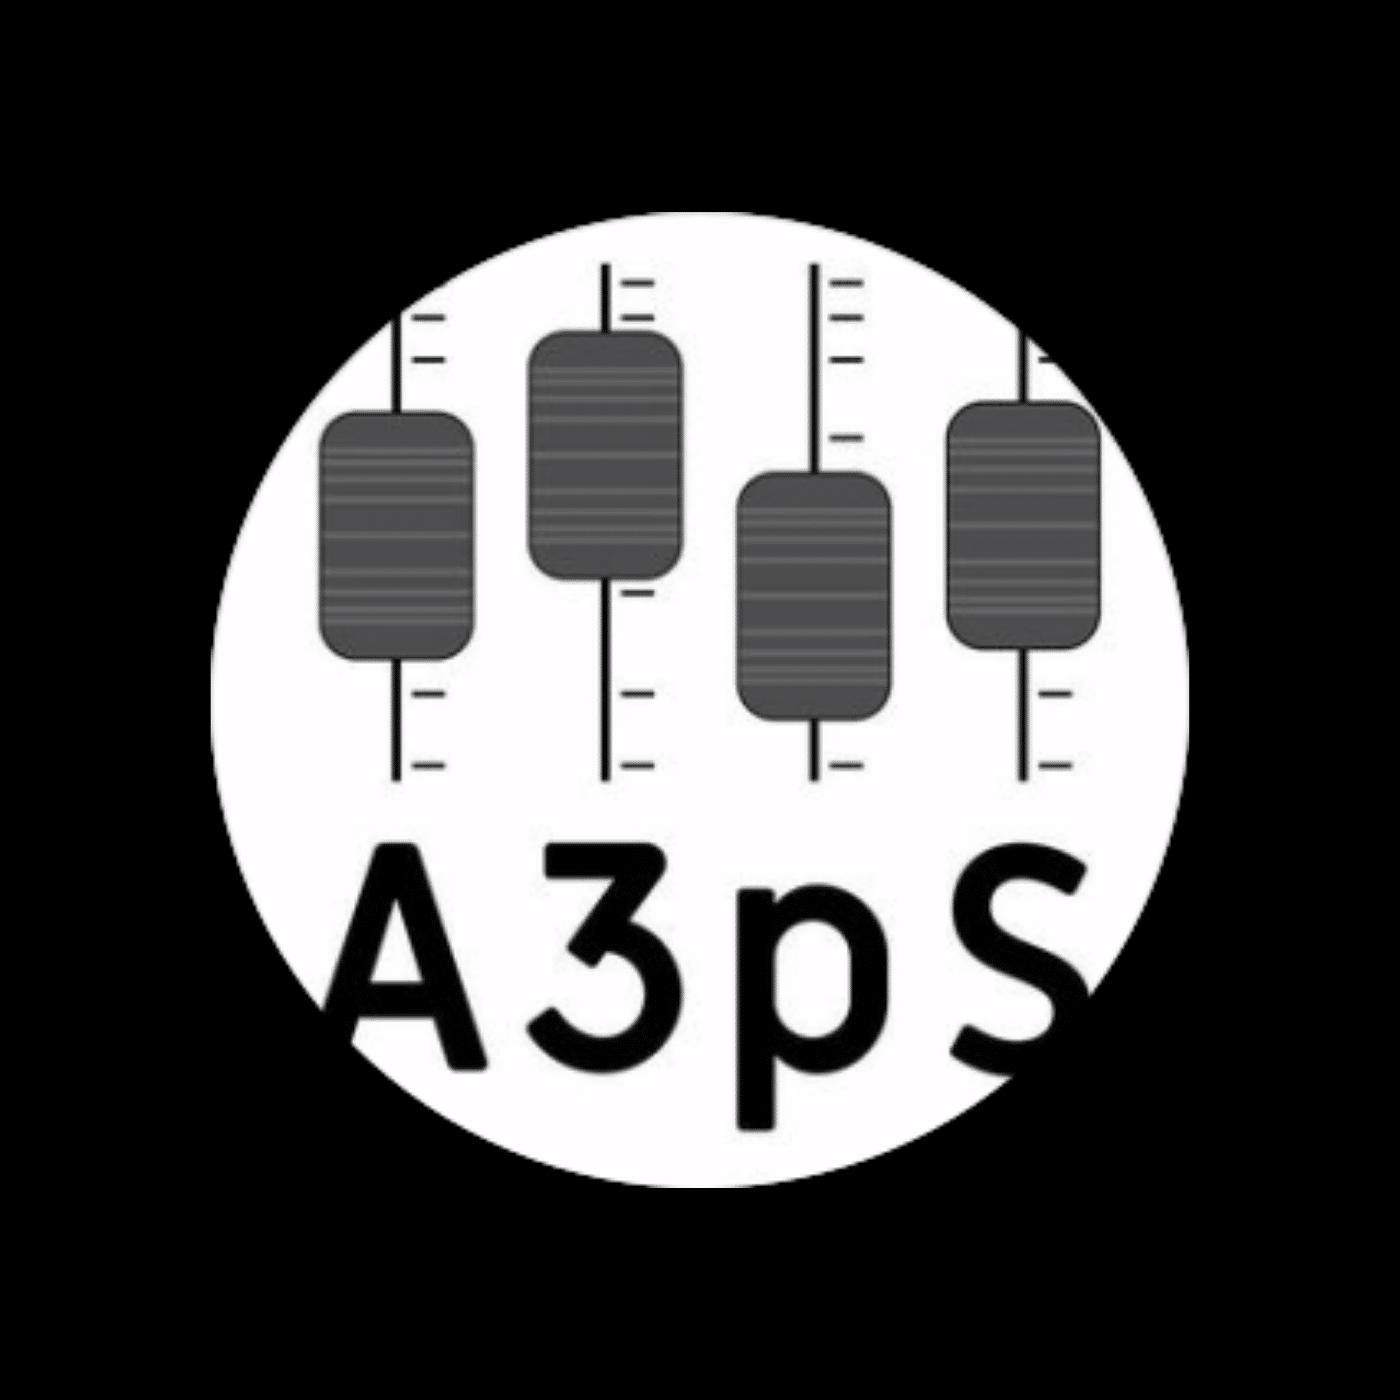 Podcast A3pS